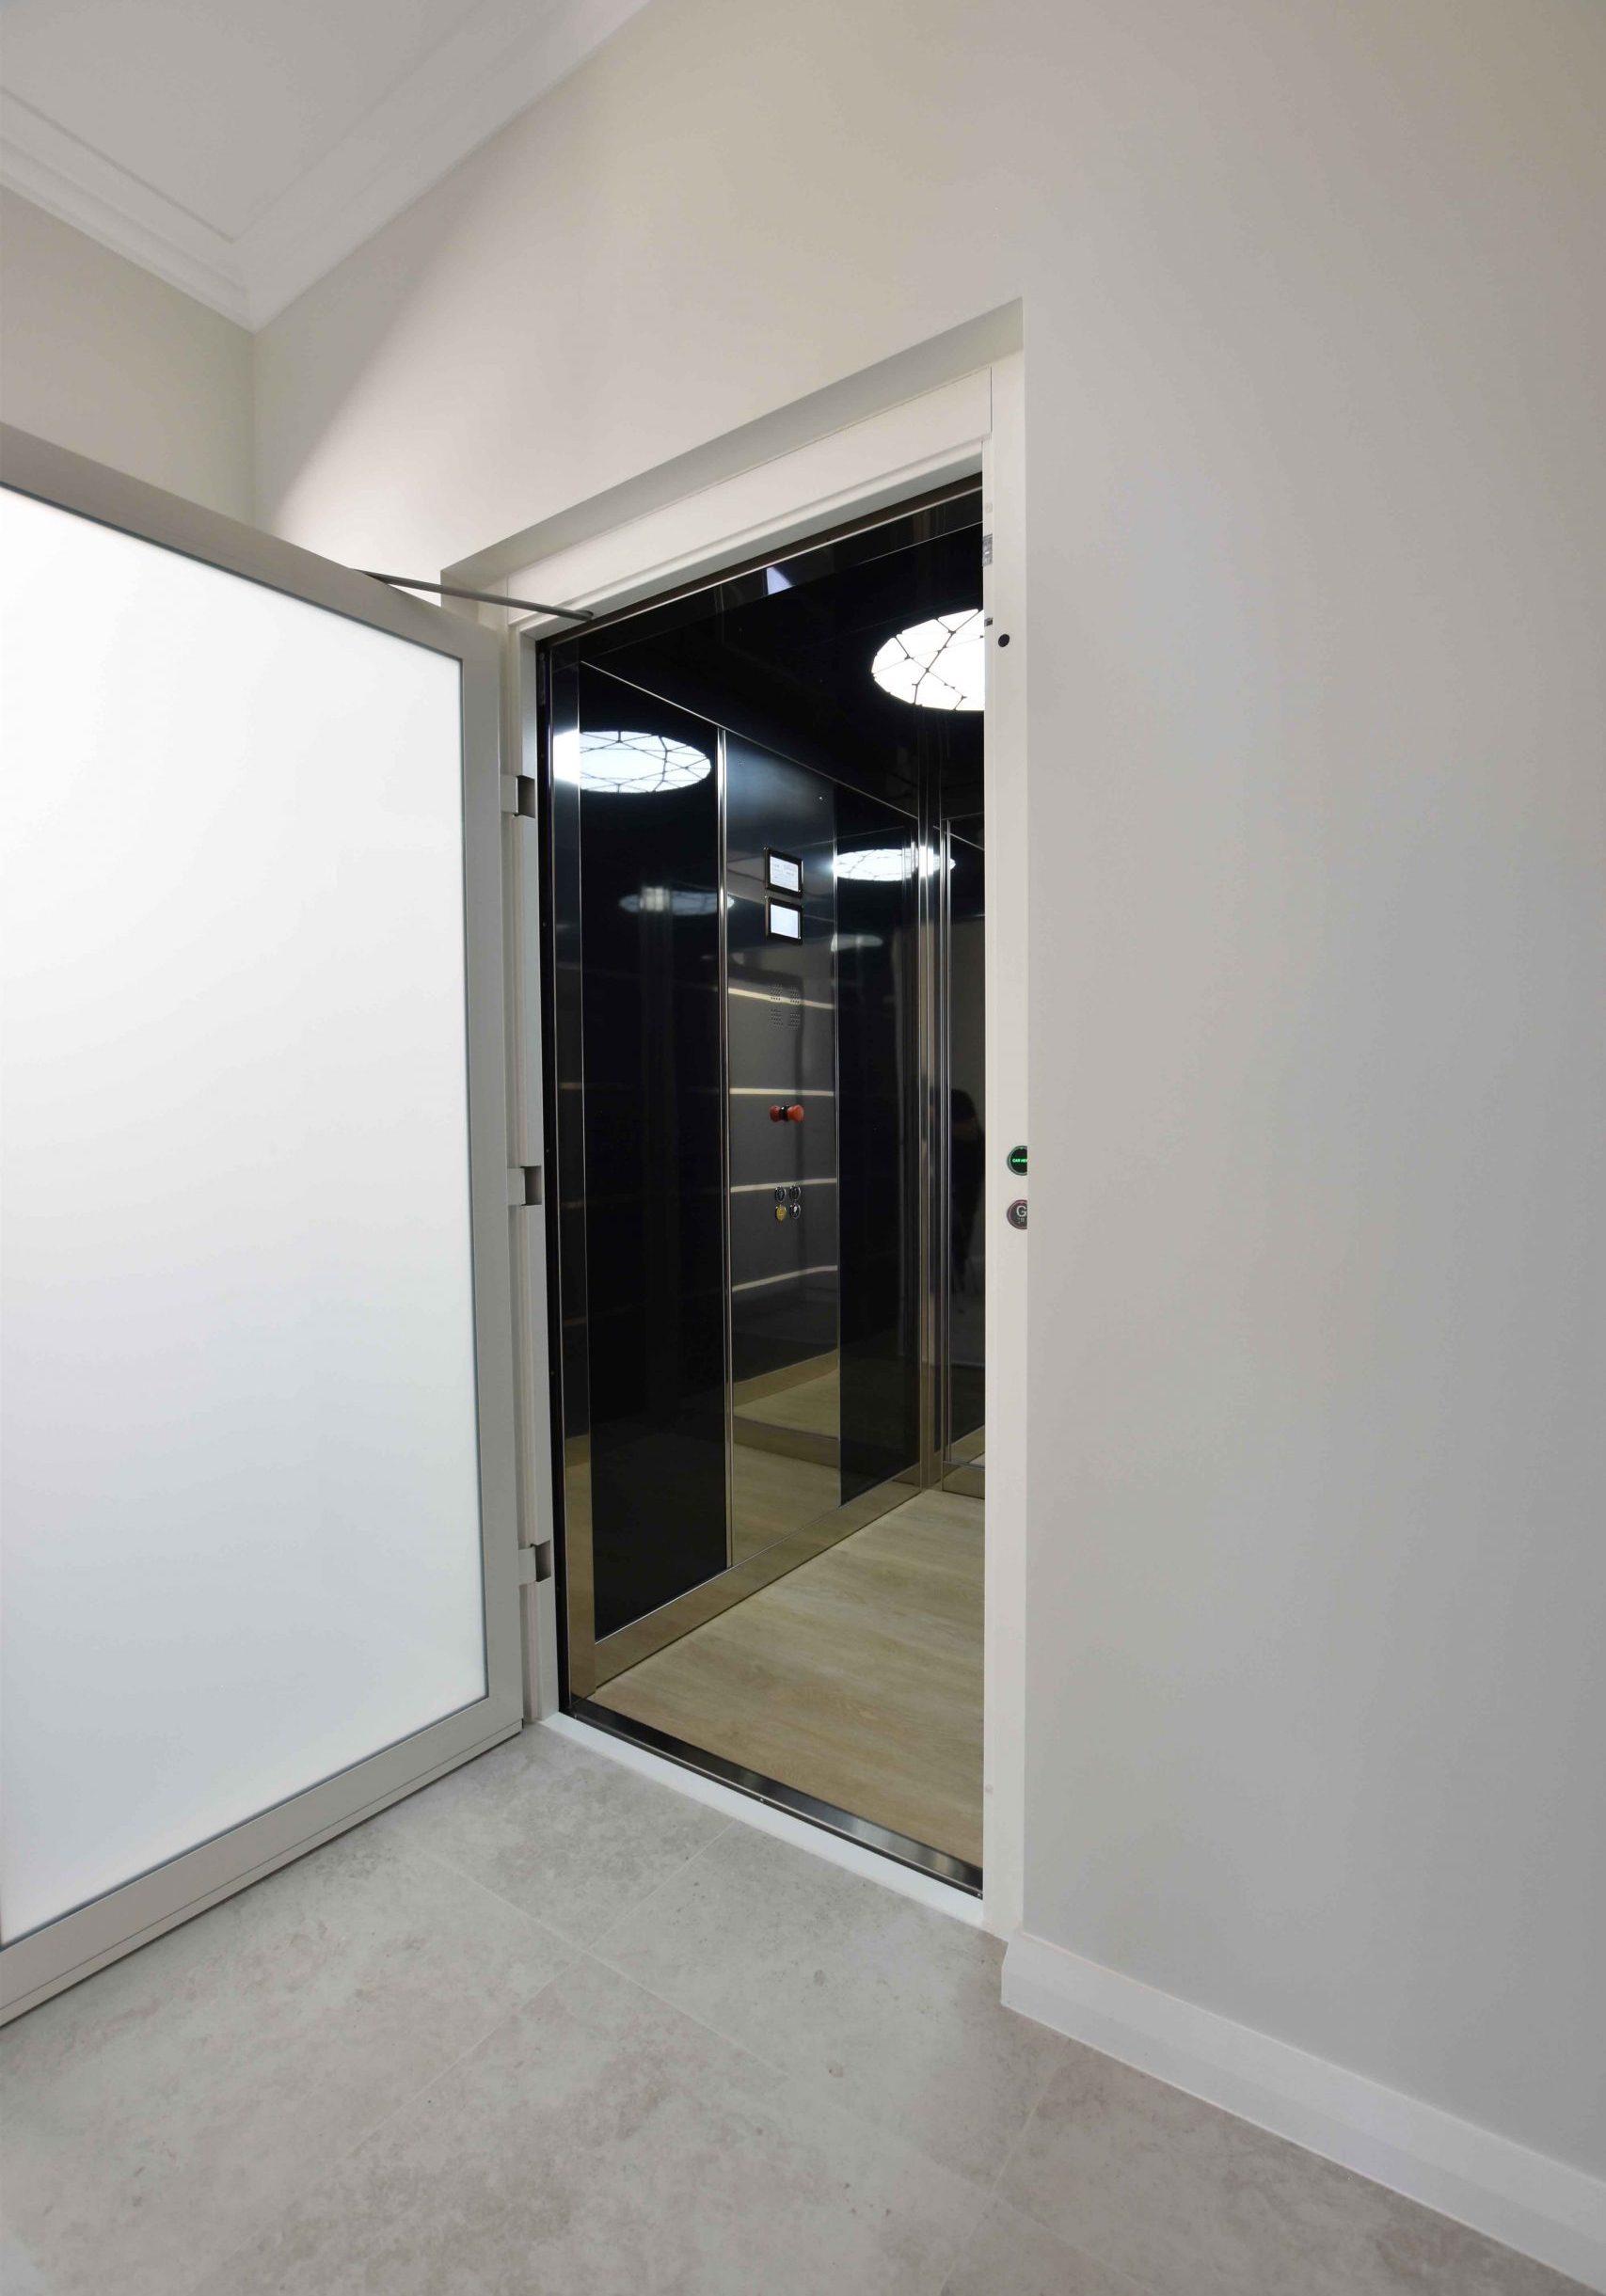 Residential sovereign lift with door open, showing internal fit out.